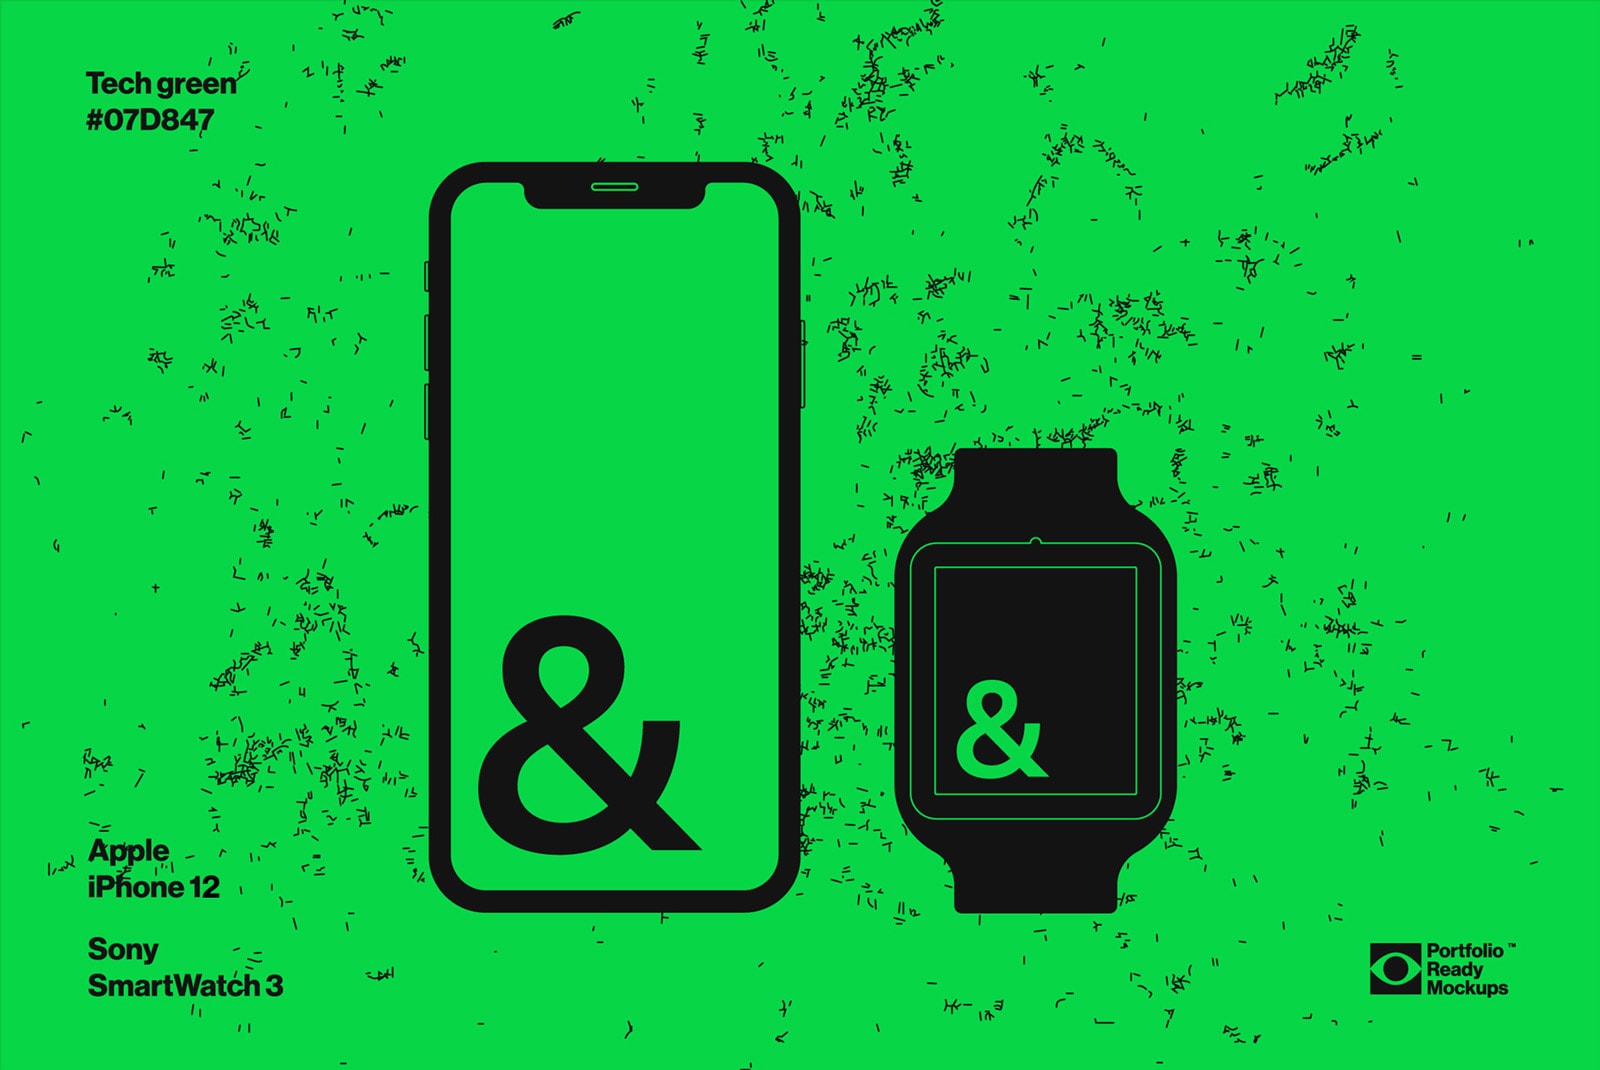 Smartphone and smartwatch mockup on tech green background for showcasing app design, suitable for designers and digital asset marketplace.